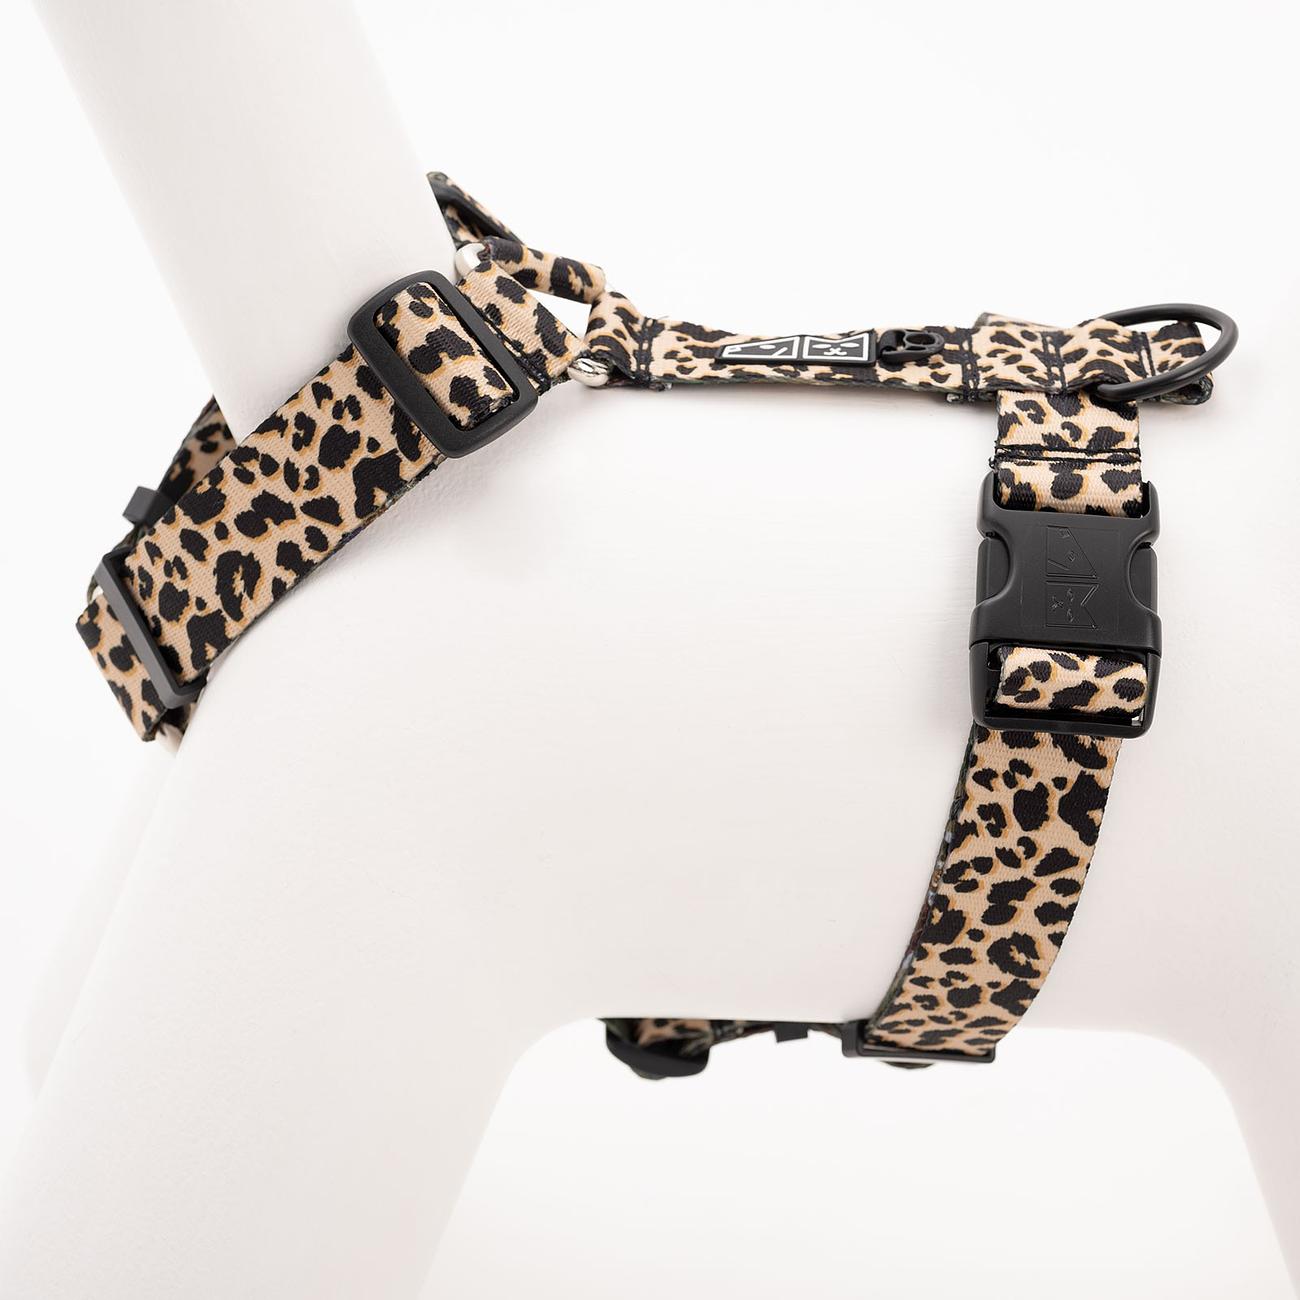 Stay-on guard harness "Respect the wildness" with leopard pattern on the top